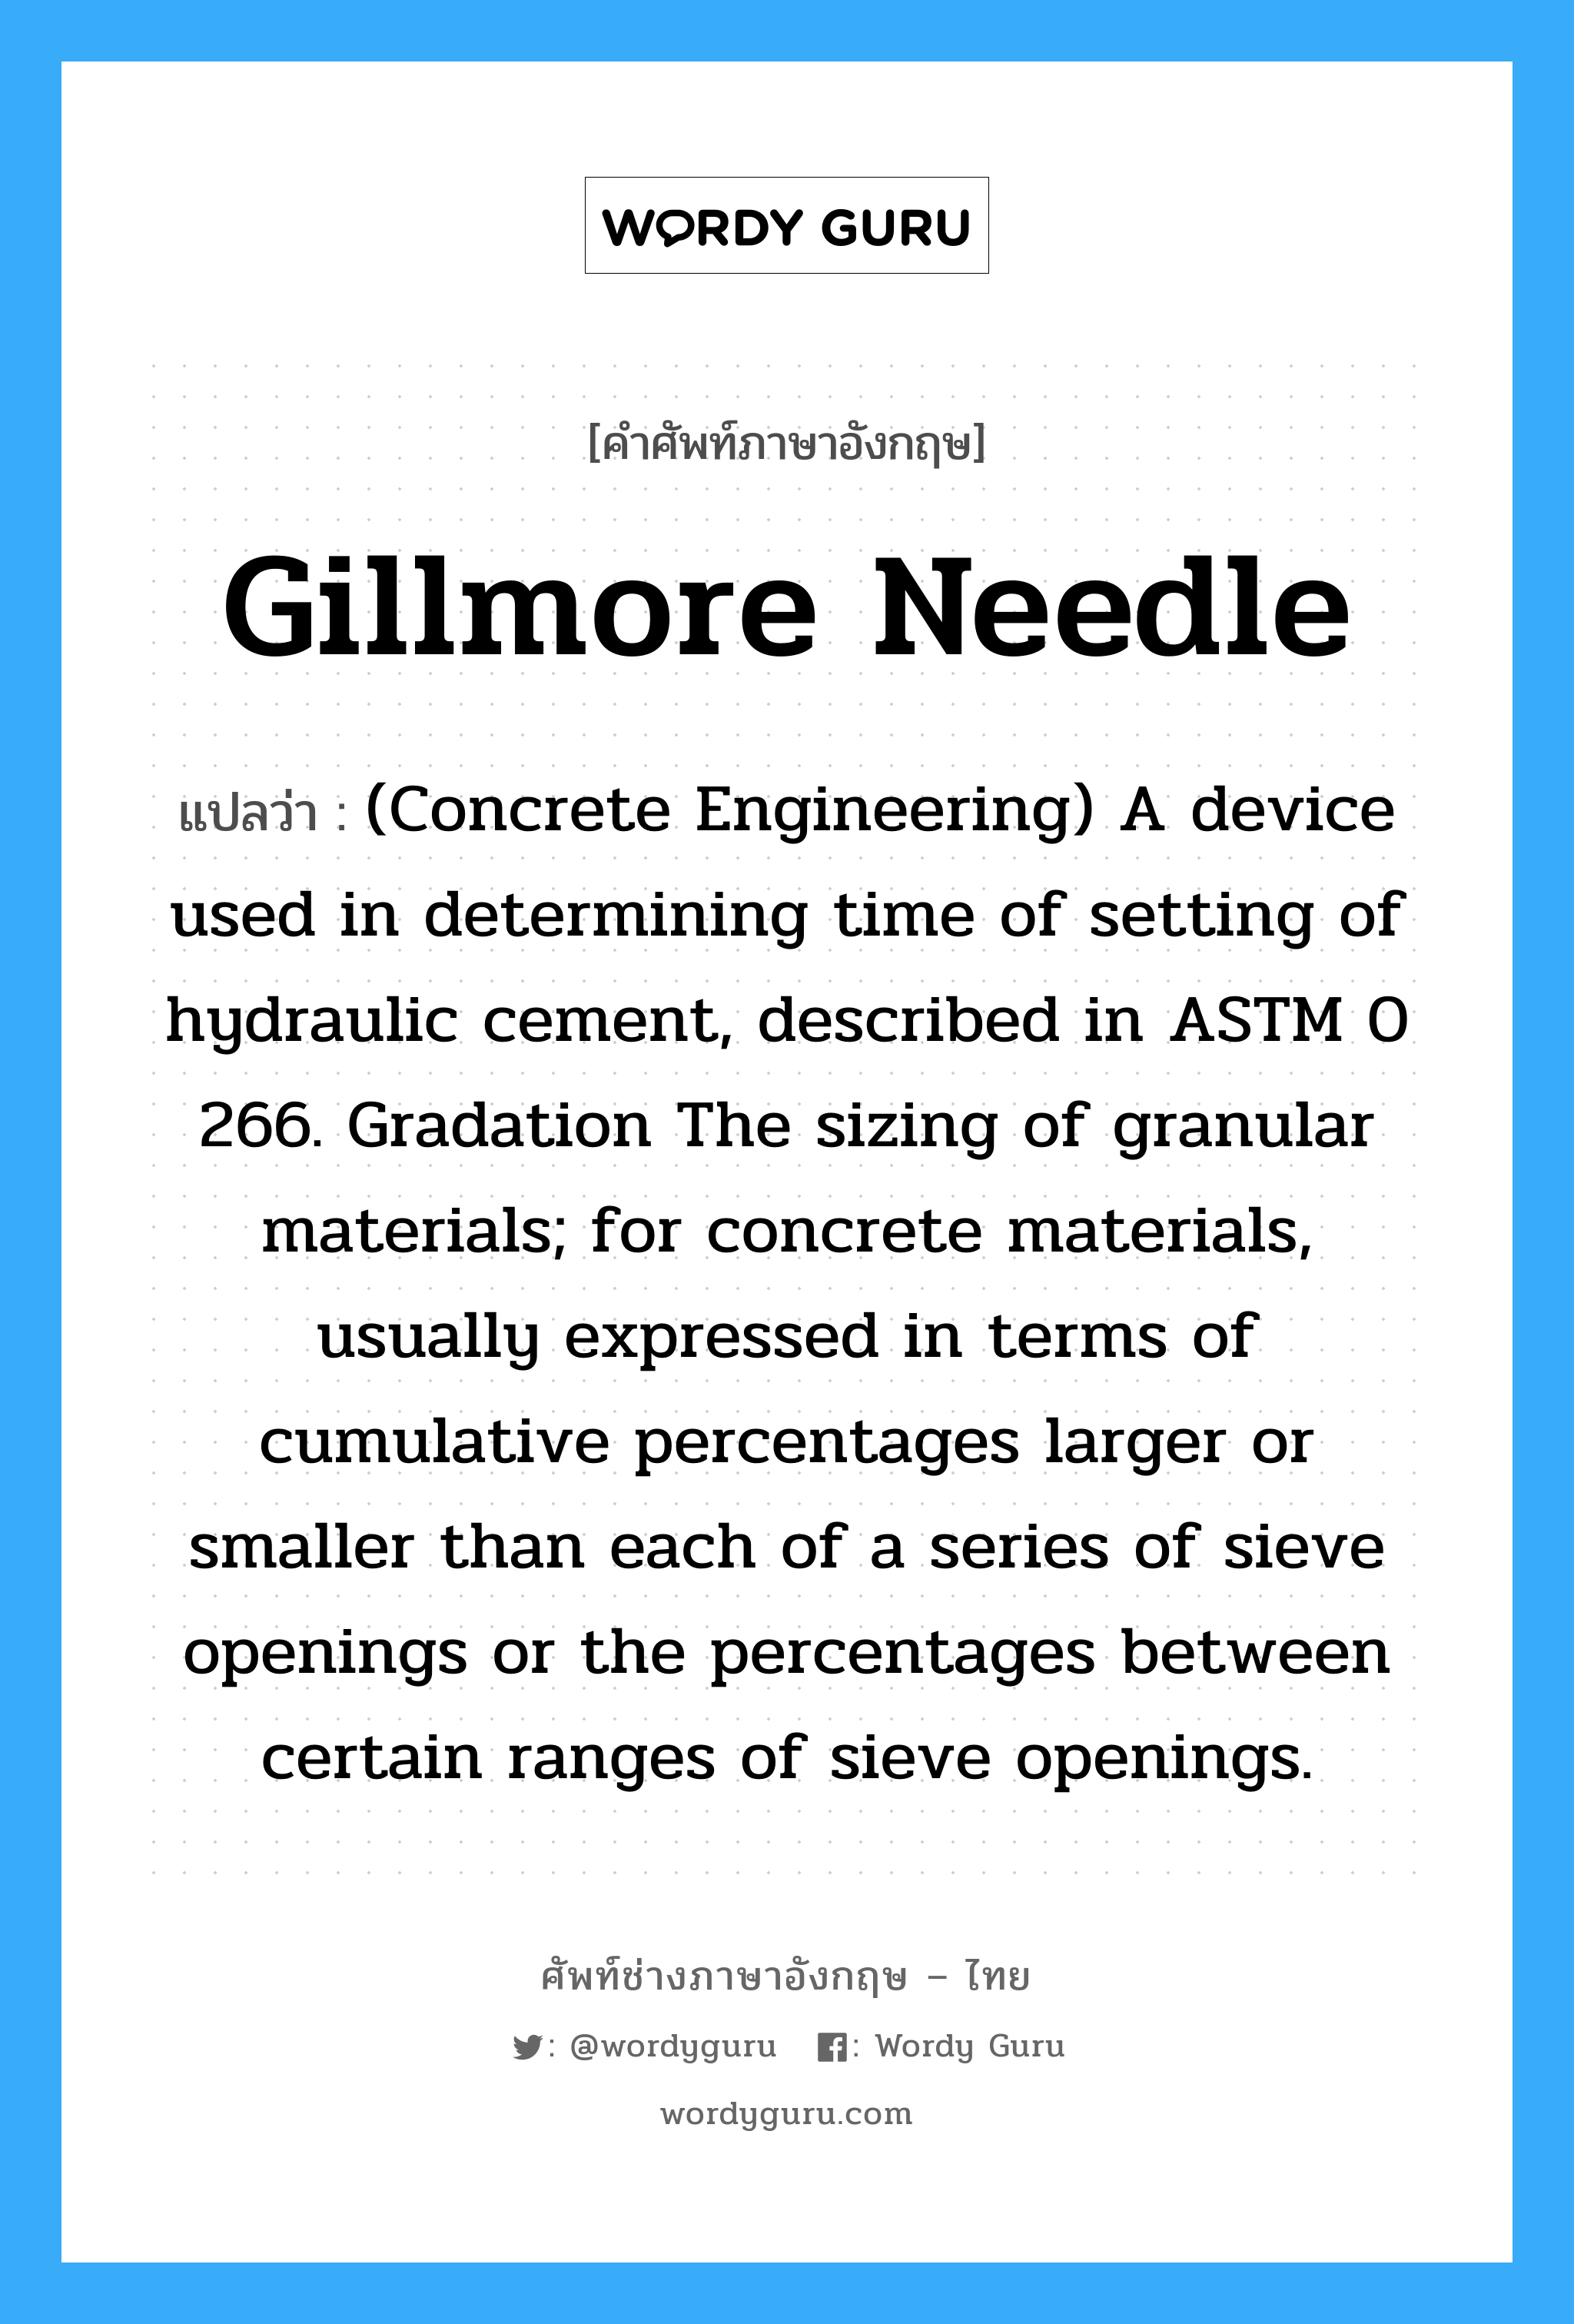 Gillmore Needle แปลว่า?, คำศัพท์ช่างภาษาอังกฤษ - ไทย Gillmore Needle คำศัพท์ภาษาอังกฤษ Gillmore Needle แปลว่า (Concrete Engineering) A device used in determining time of setting of hydraulic cement, described in ASTM 0 266. Gradation The sizing of granular materials; for concrete materials, usually expressed in terms of cumulative percentages larger or smaller than each of a series of sieve openings or the percentages between certain ranges of sieve openings.